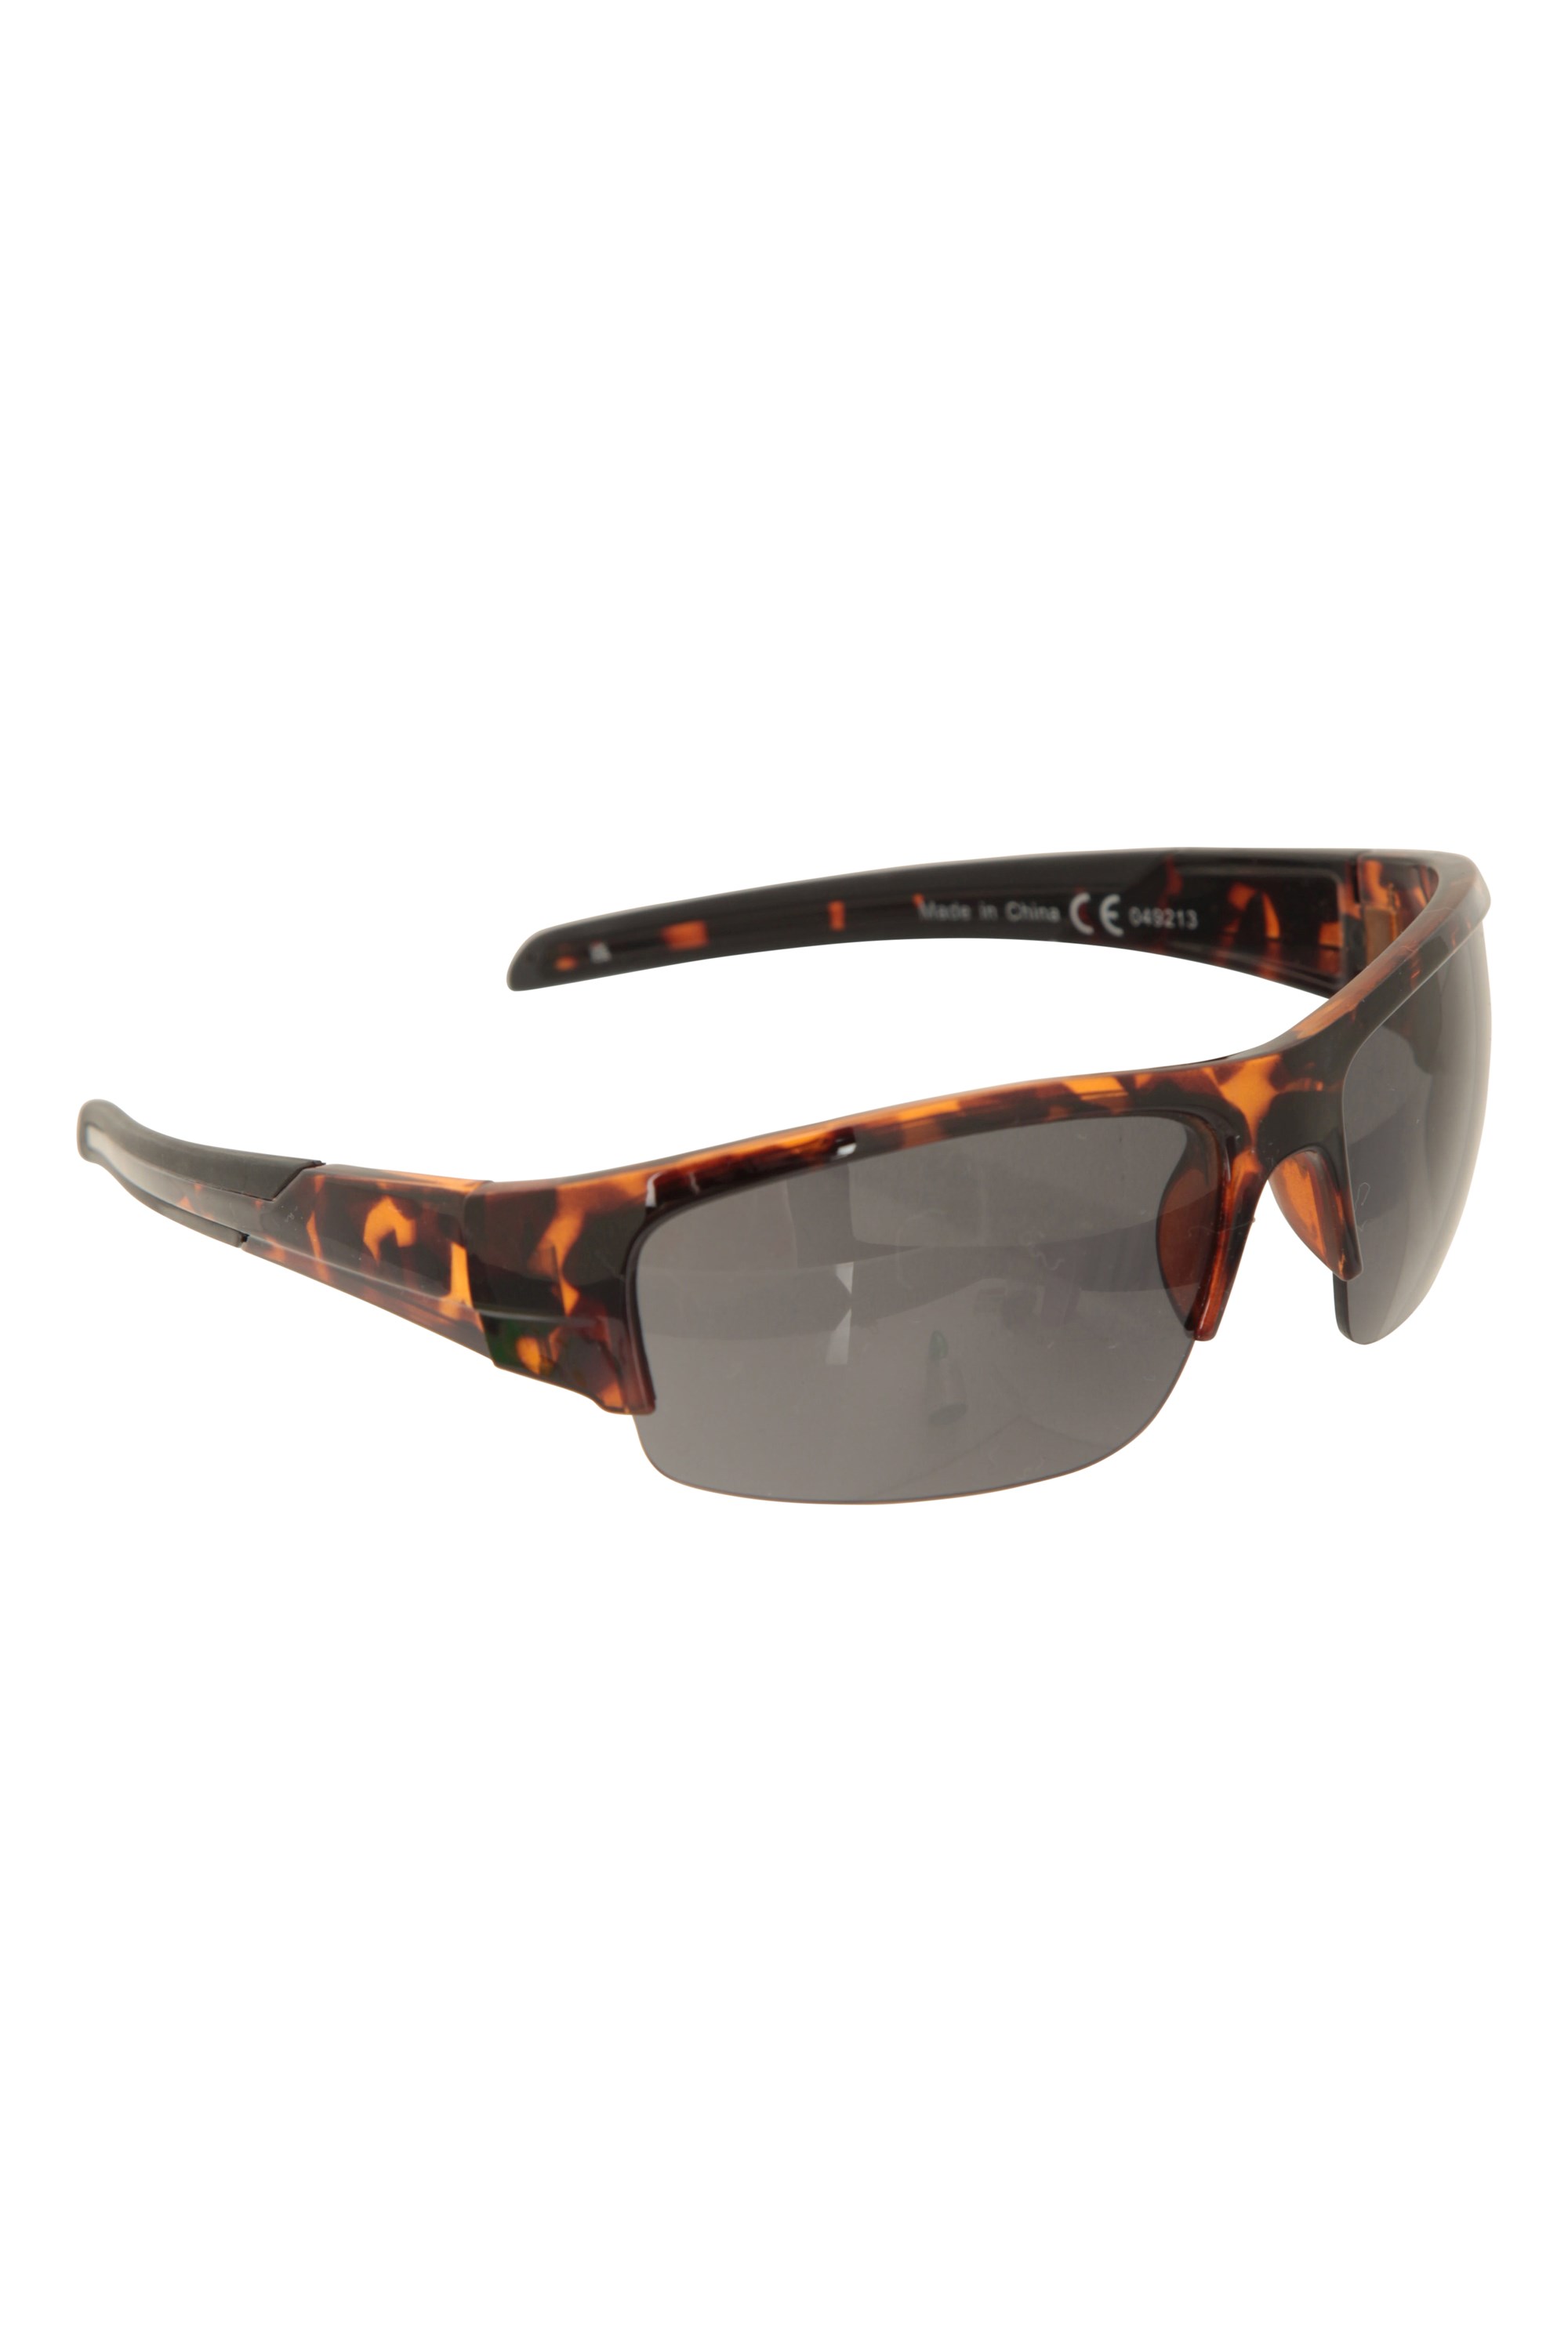 Hampshire Womens Active Sunglasses - Brown